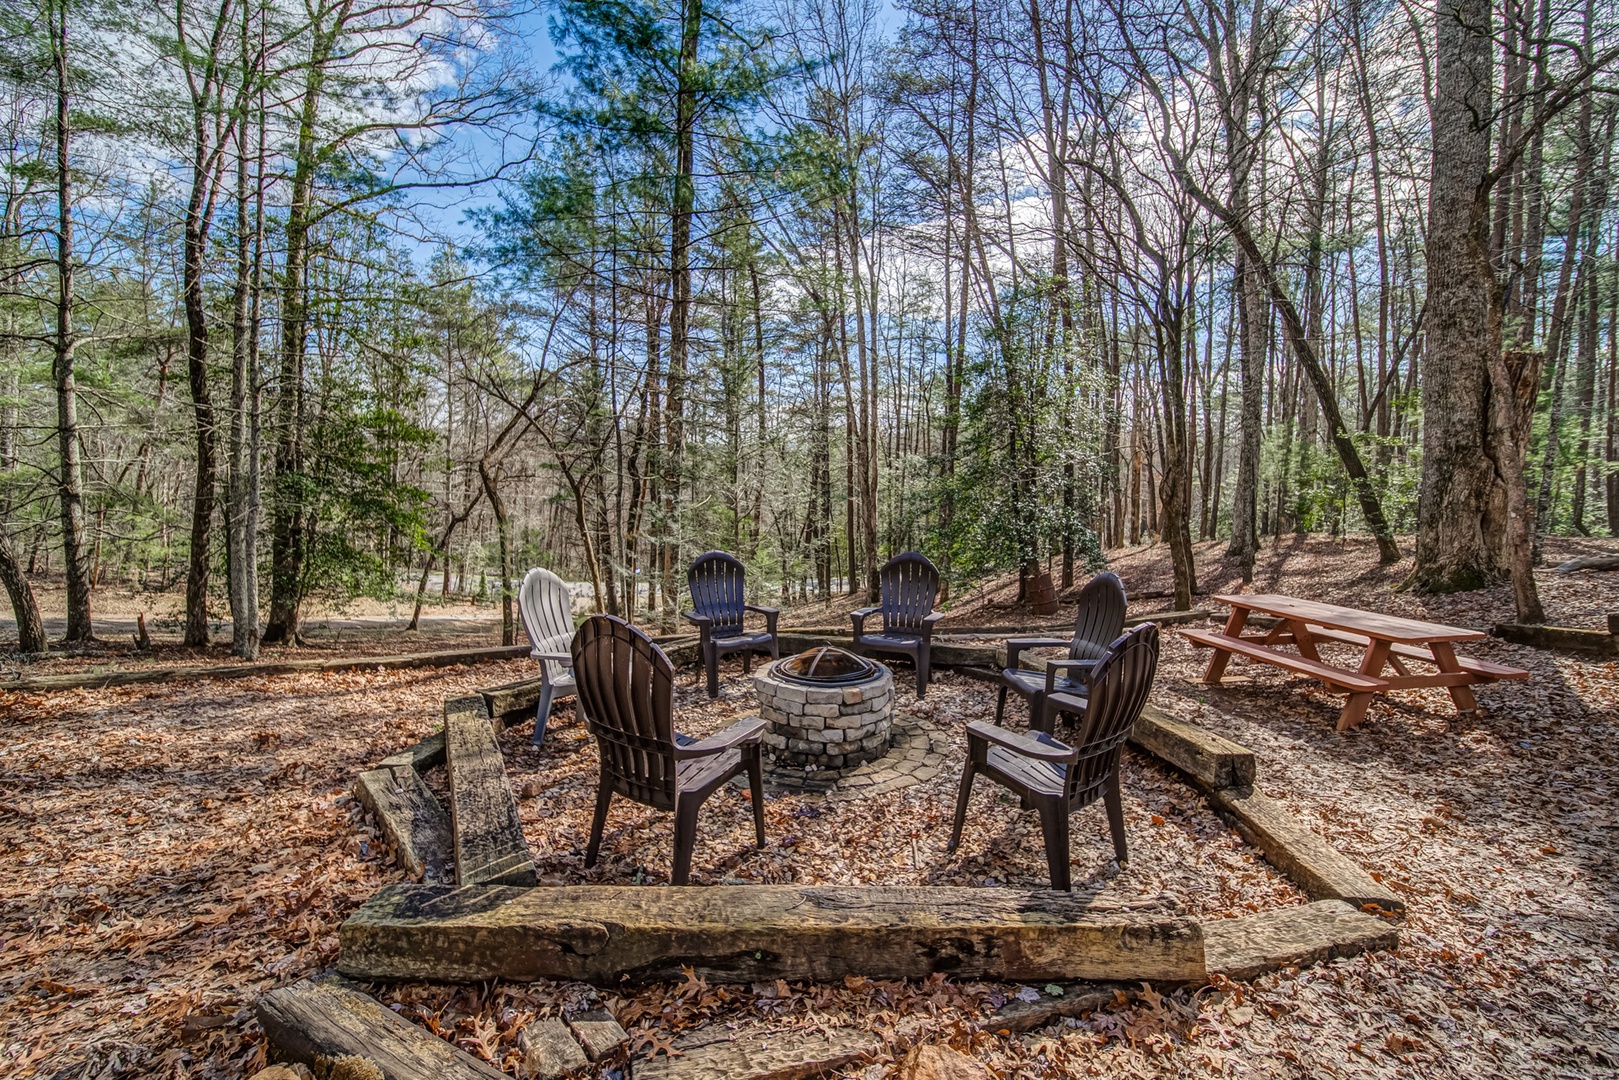 A casual stroll down the gravel path takes you to this extra large firepit area with picnic table for roasting marshmallows and swapping stories